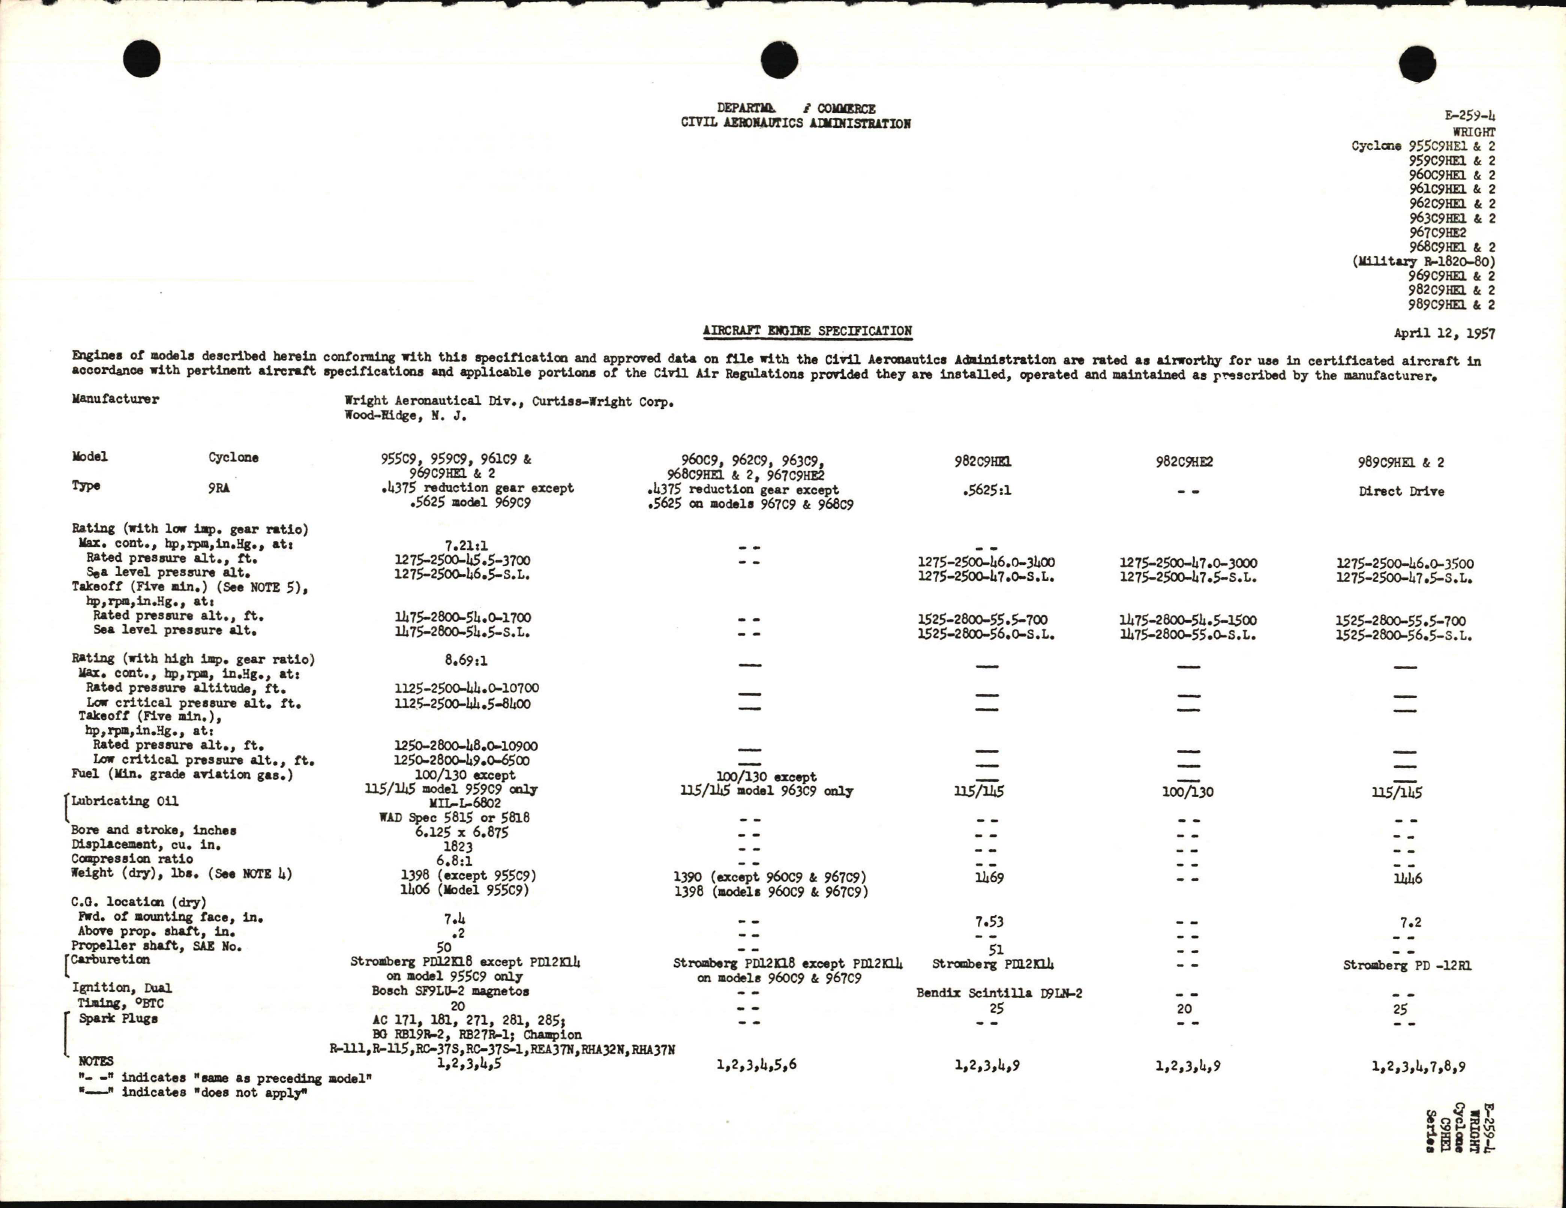 Sample page 1 from AirCorps Library document: 955C9HE, 959C9HE, 960C9HE, R-1820-80 Cyclone